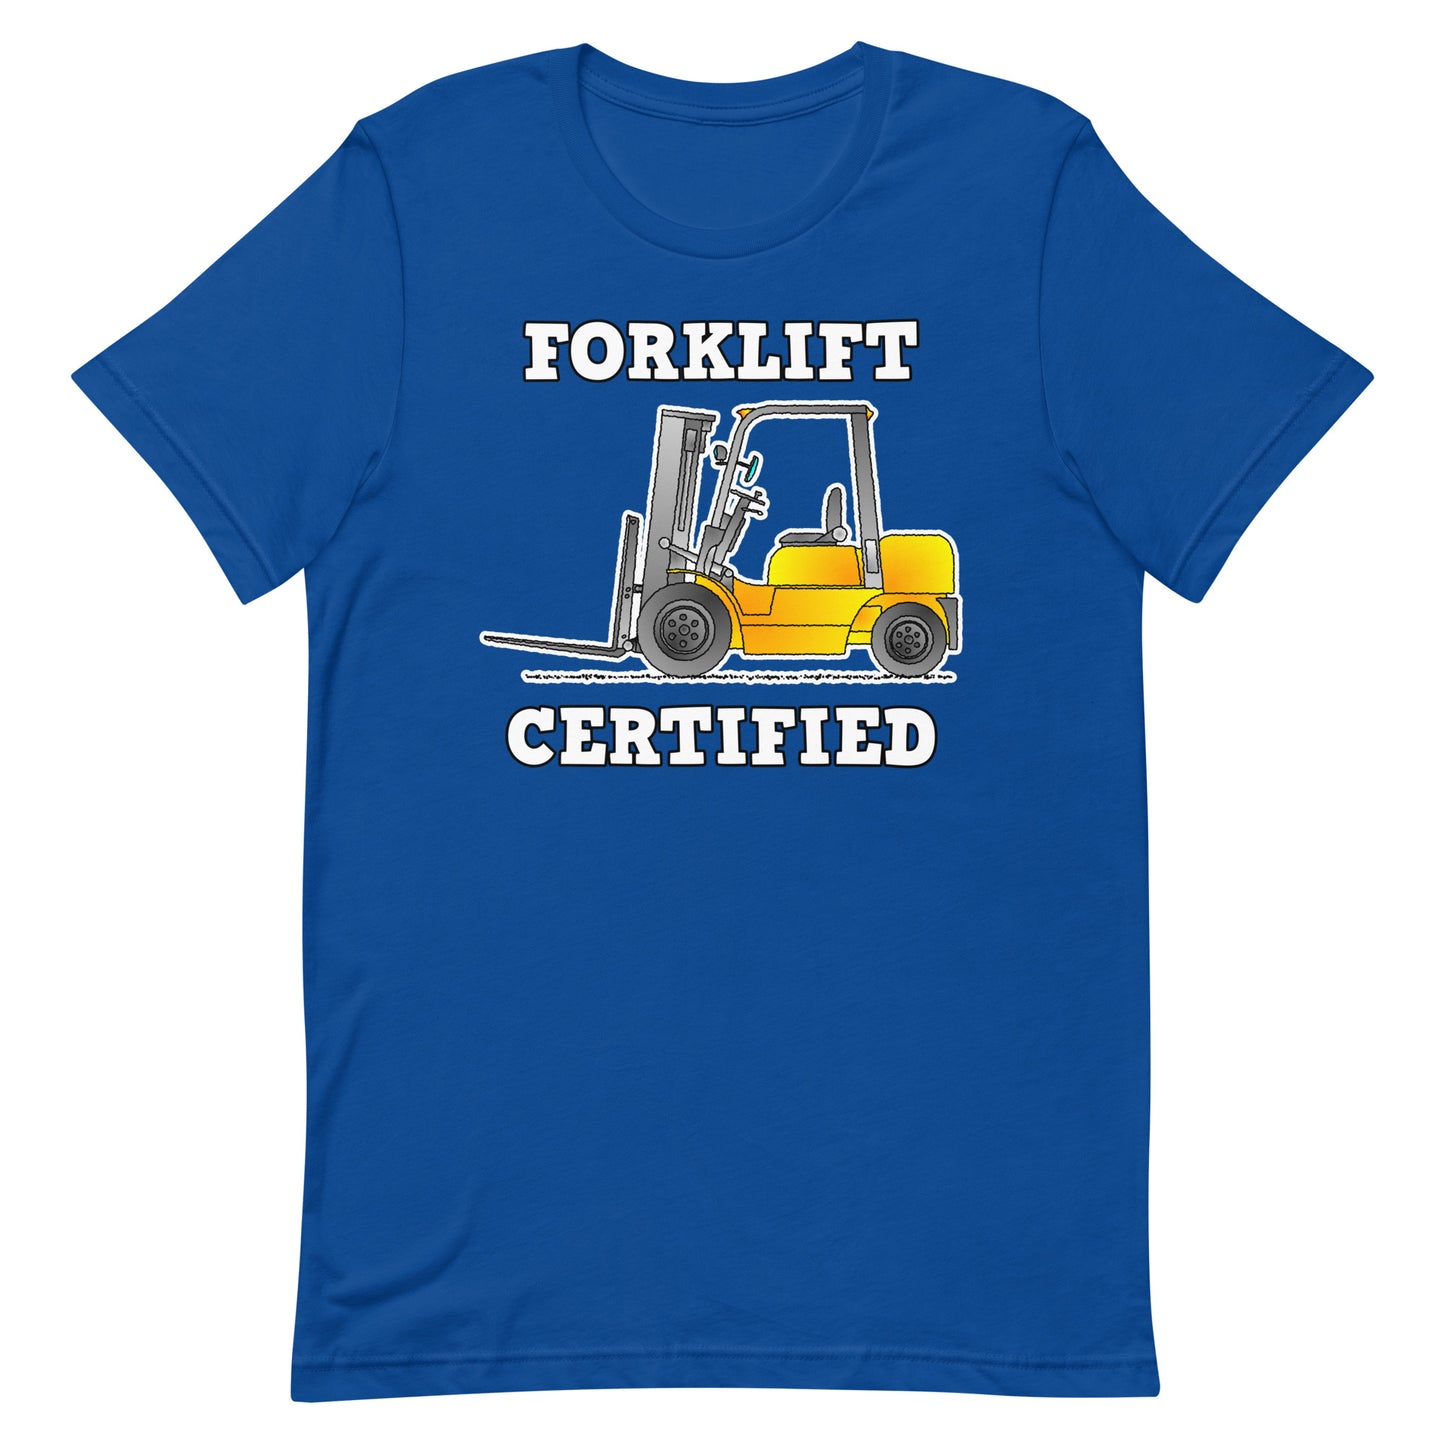 Forklift Certified T-Shirt, Forklift Truck Operator, Funny Tee